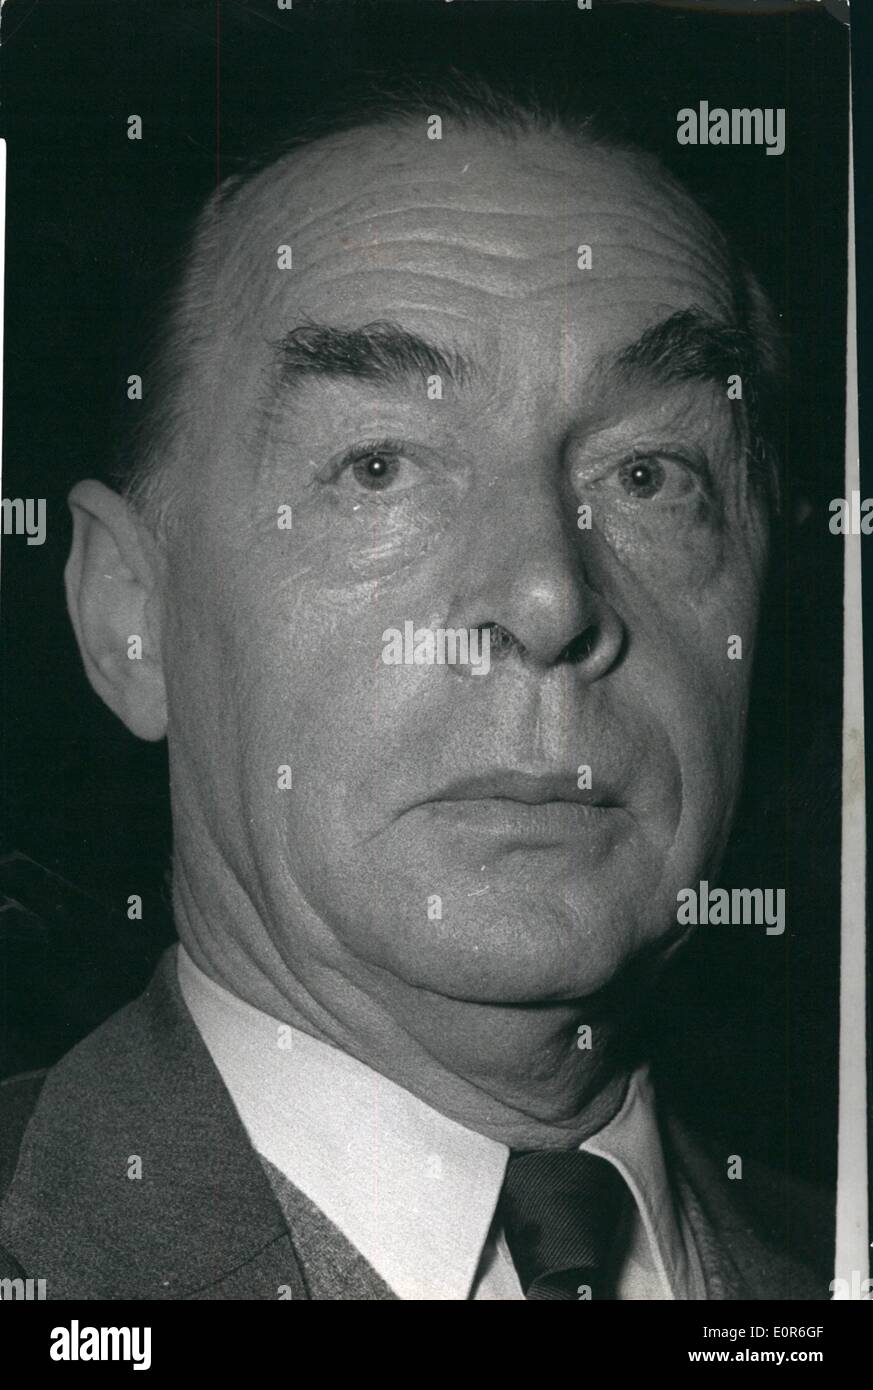 Jun. 06, 1958 - Erich Remarque 60 years old: On June 22, 1958 the author Erich Maria Remarque (ERICH MARIA REMARQUE), real name Stock Photo